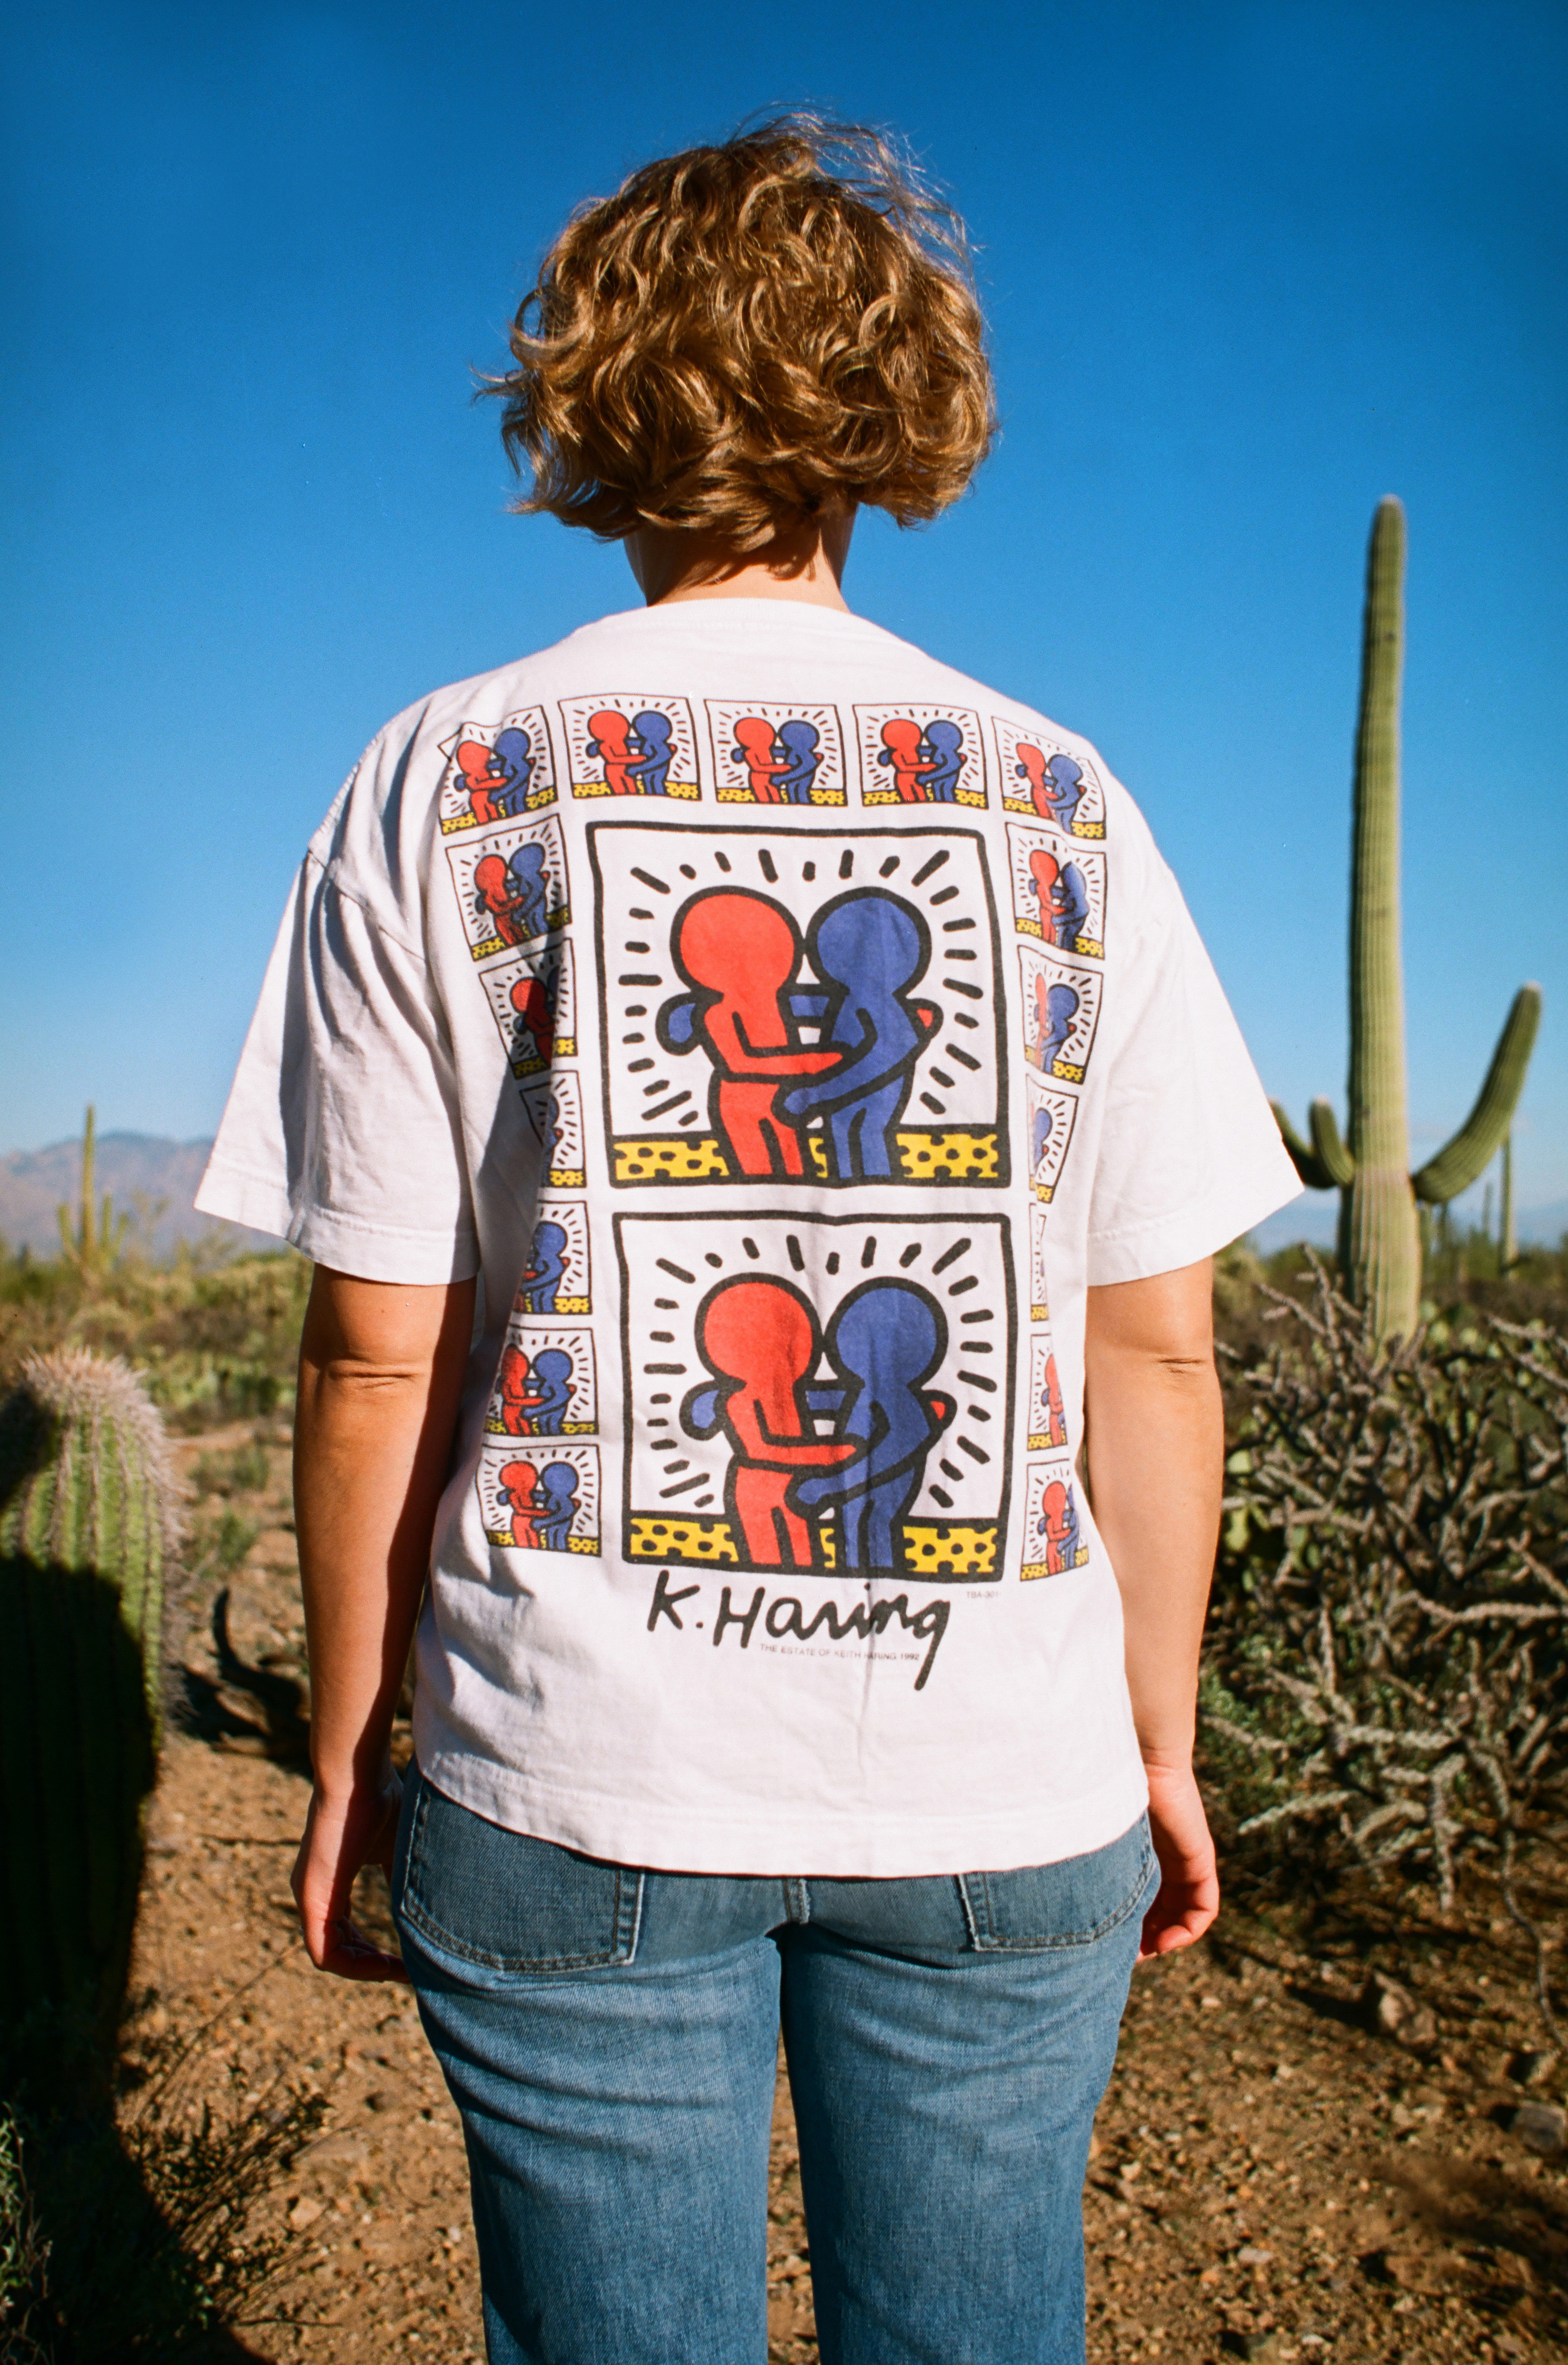 Keith Haring’s ‘Act Against AIDS ‘93’. Photograph by Susan A. Barnett, from her book A Typology of T-Shirts. Copyright © 2015. All Rights Reserved. FAD Magazine